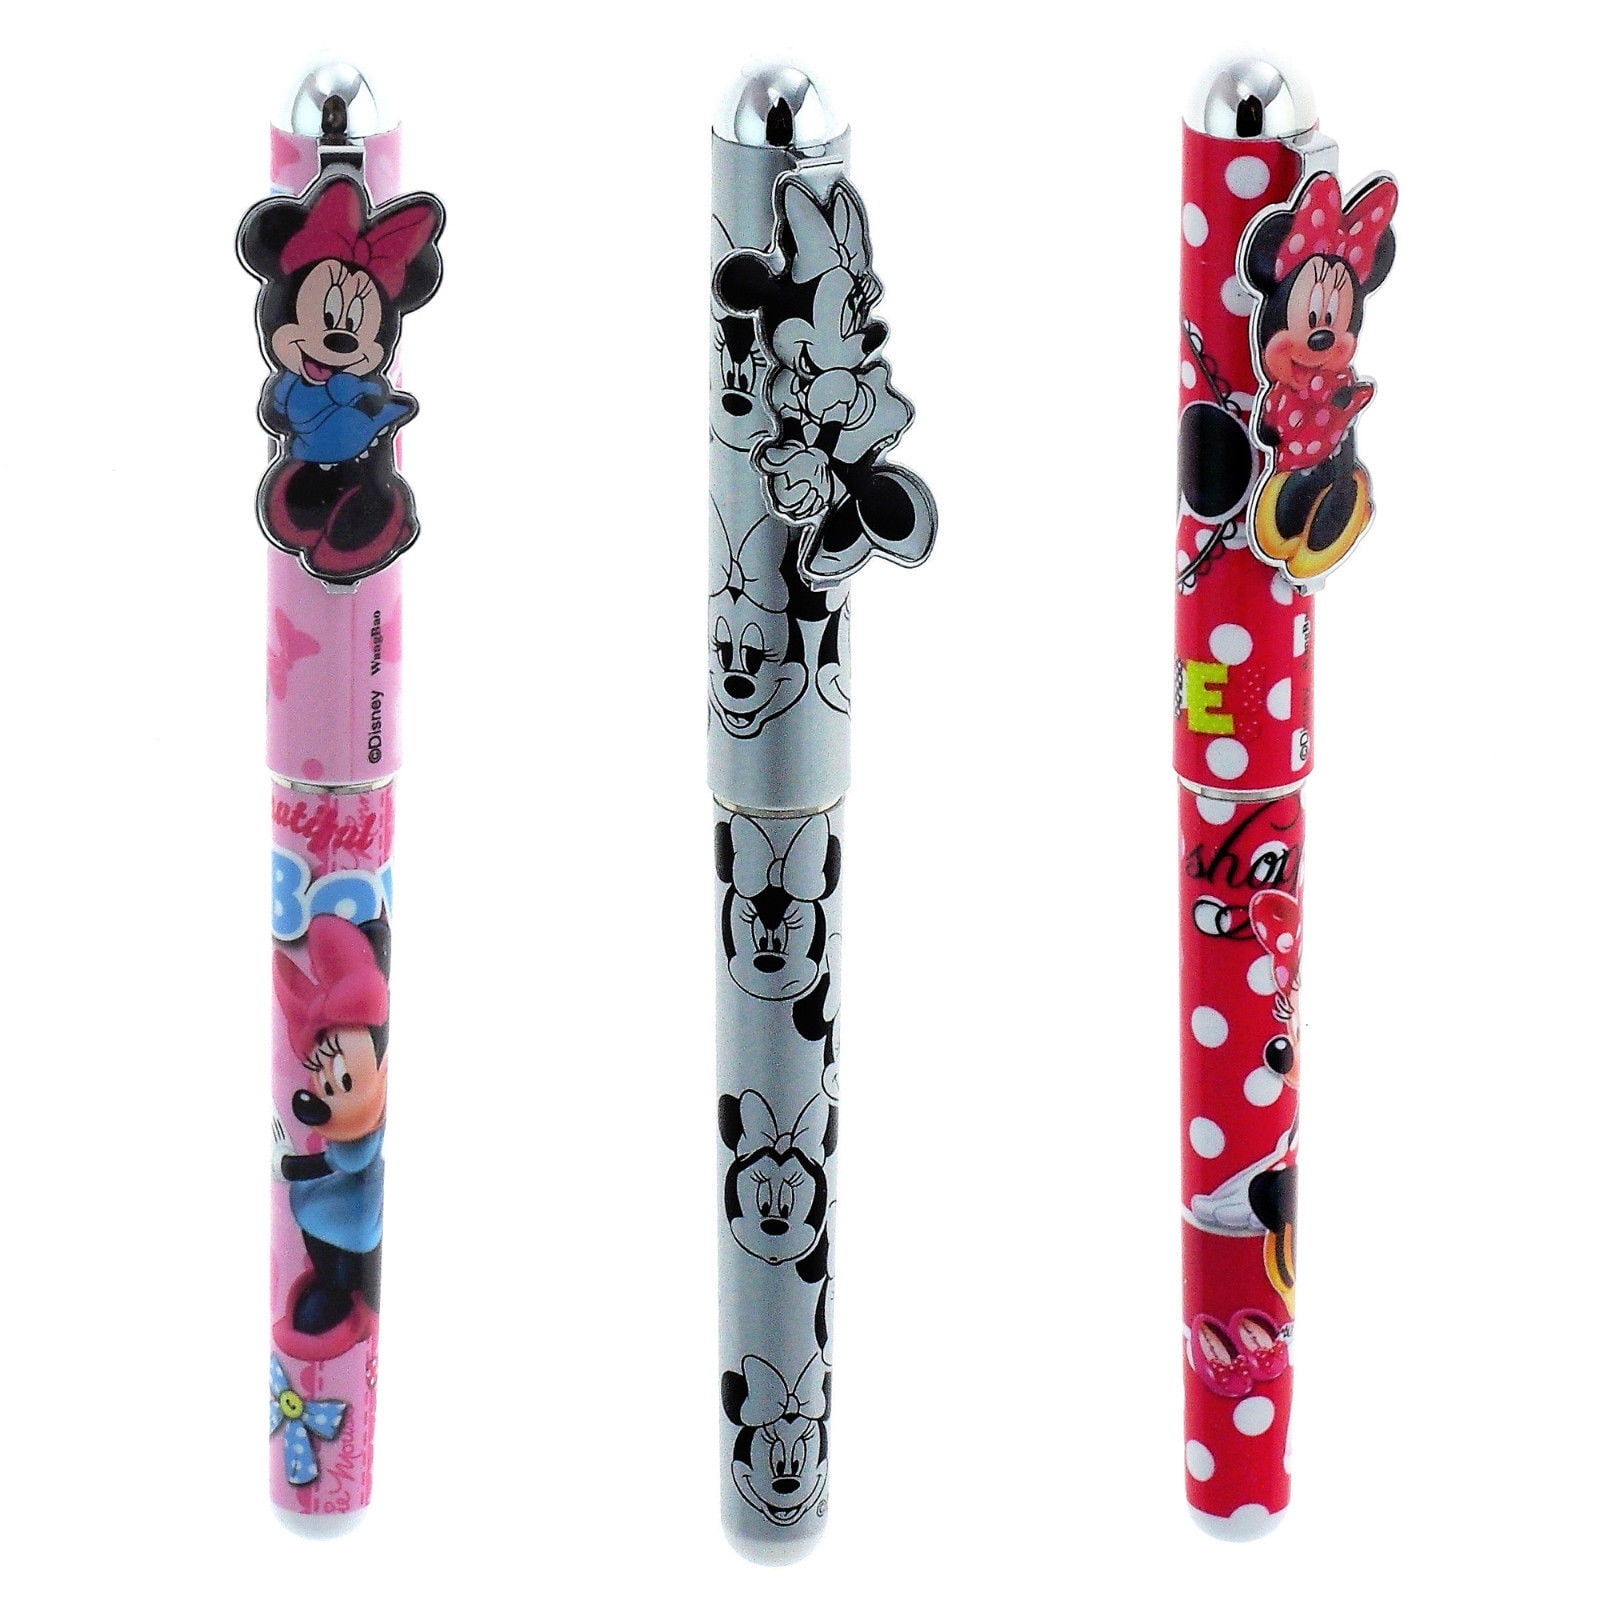 6 pcs Ball Point Pens Mickey Mouse & Minnie Authentic Licensed Roller Pen 